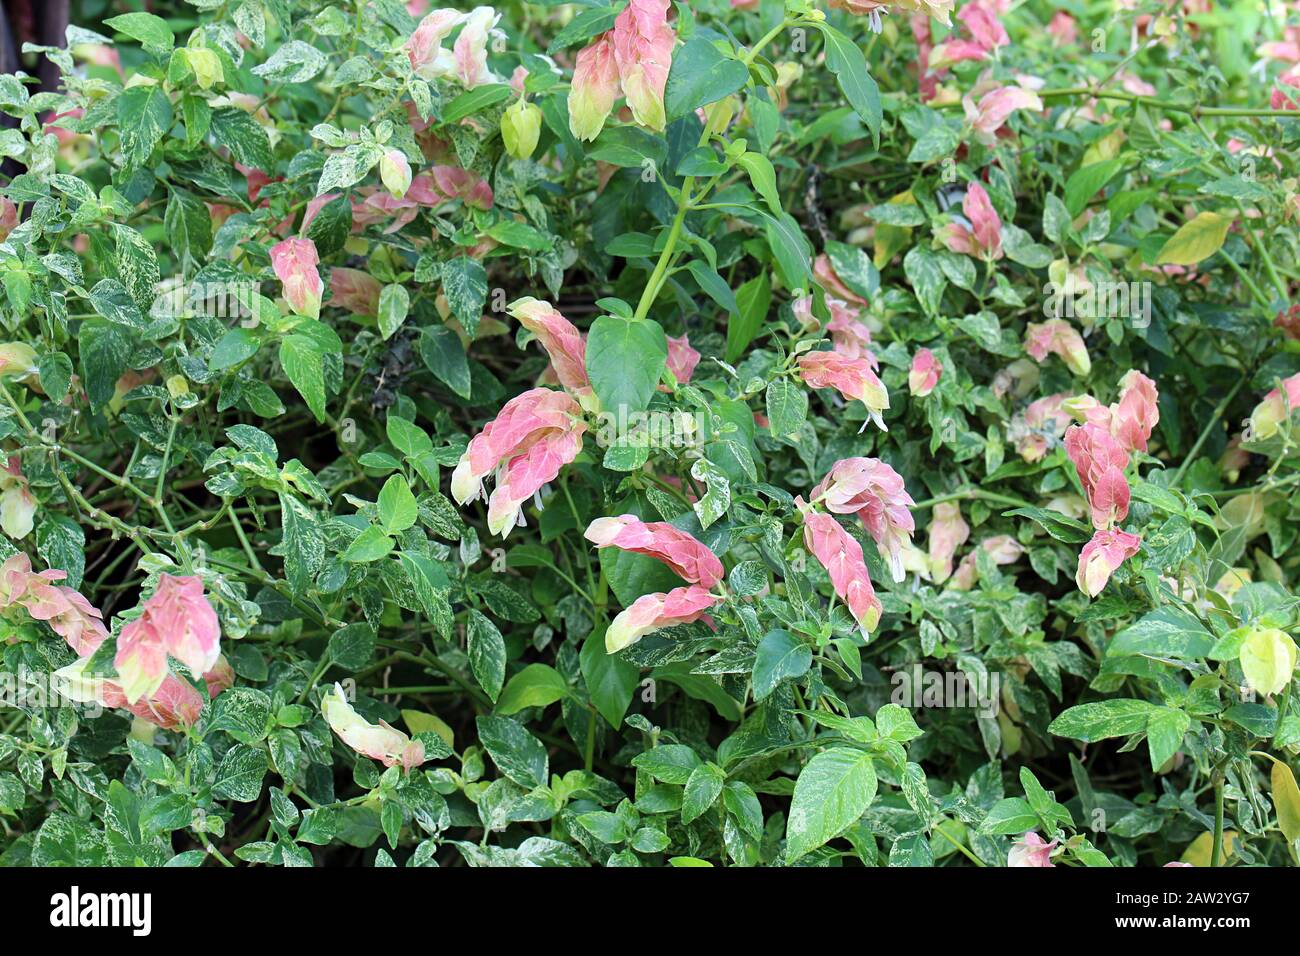 Flowering Variegated Shrimp Plants with salmon colored bracts in a garden Stock Photo